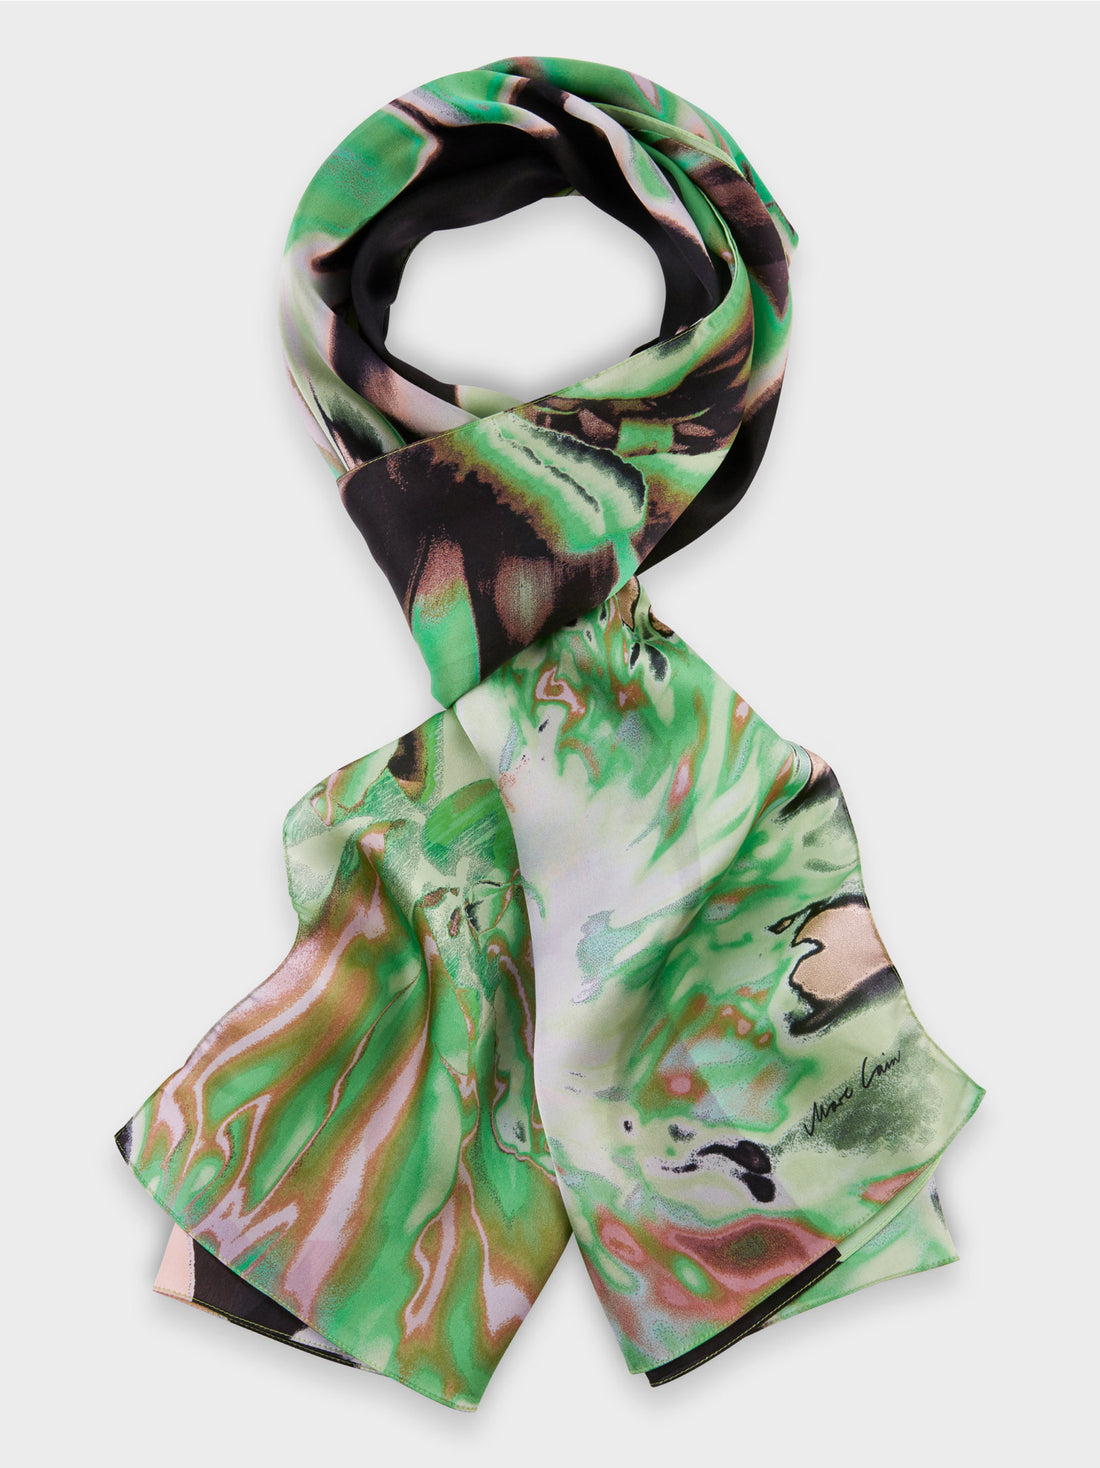 Delicate Silk Scarf With Floral Design_VC B4.15 Z15_315_01